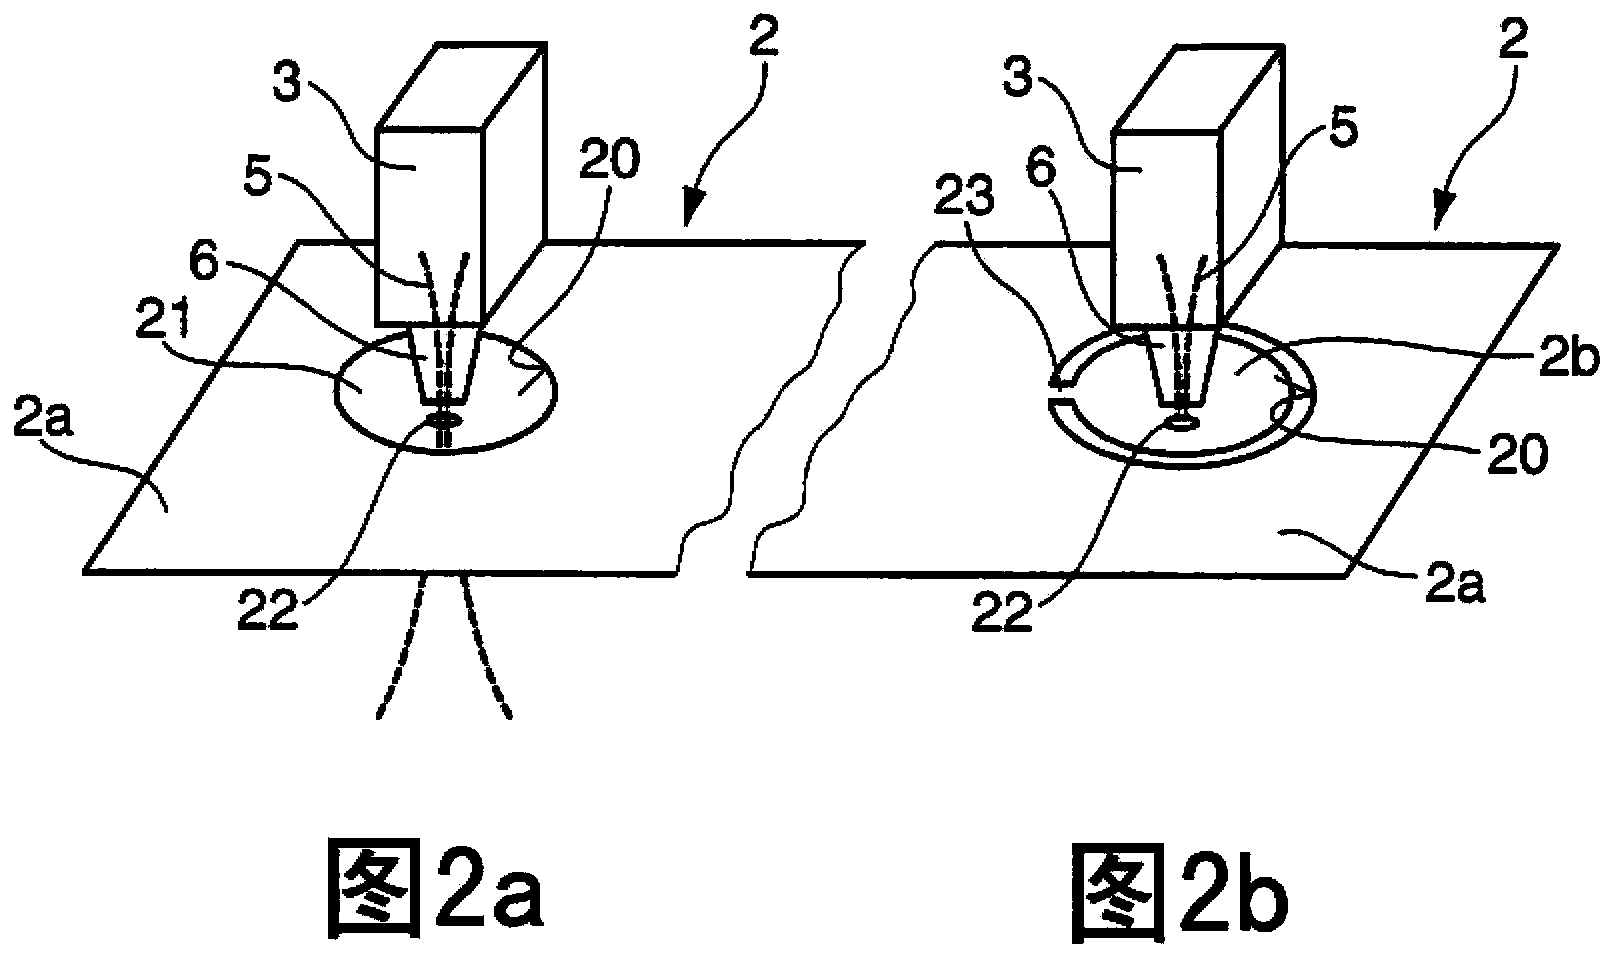 Method for monitoring cutting machining on a workpiece